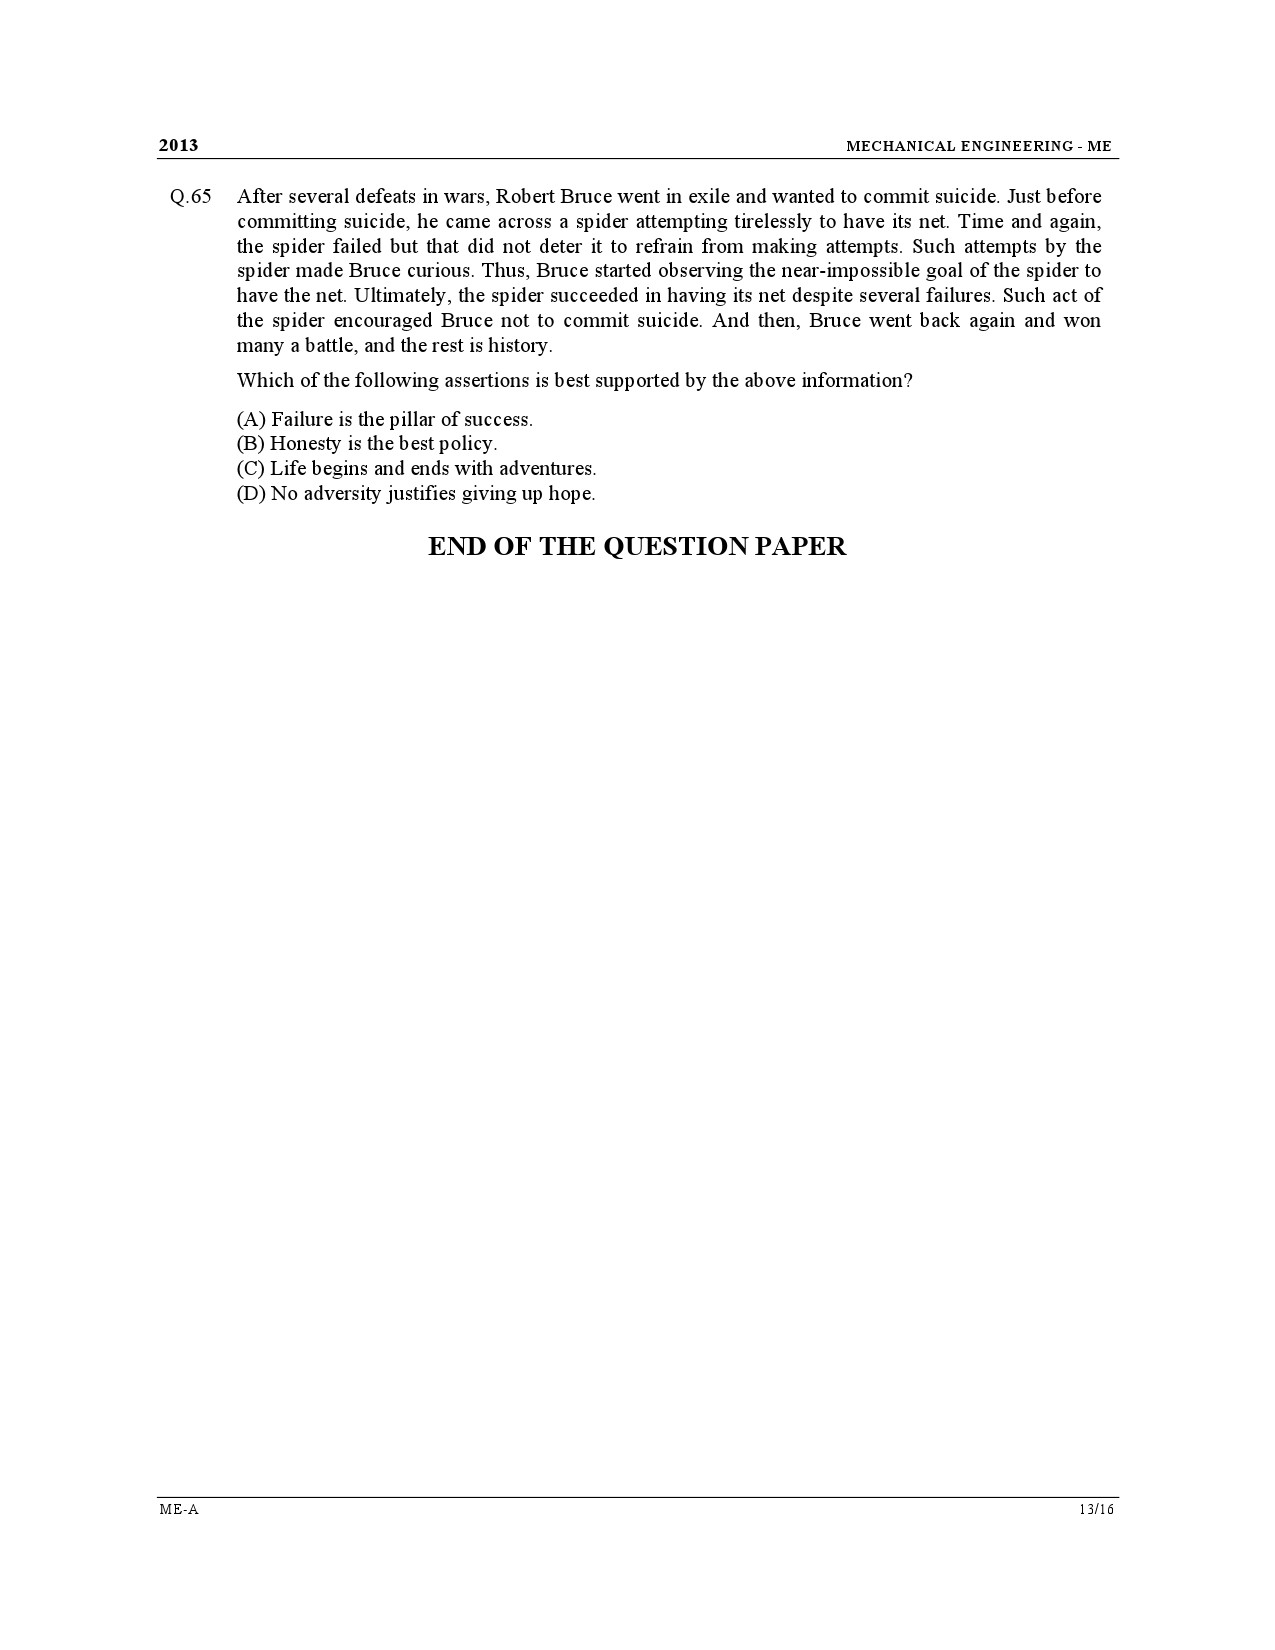 GATE Exam Question Paper 2013 Mechanical Engineering 13